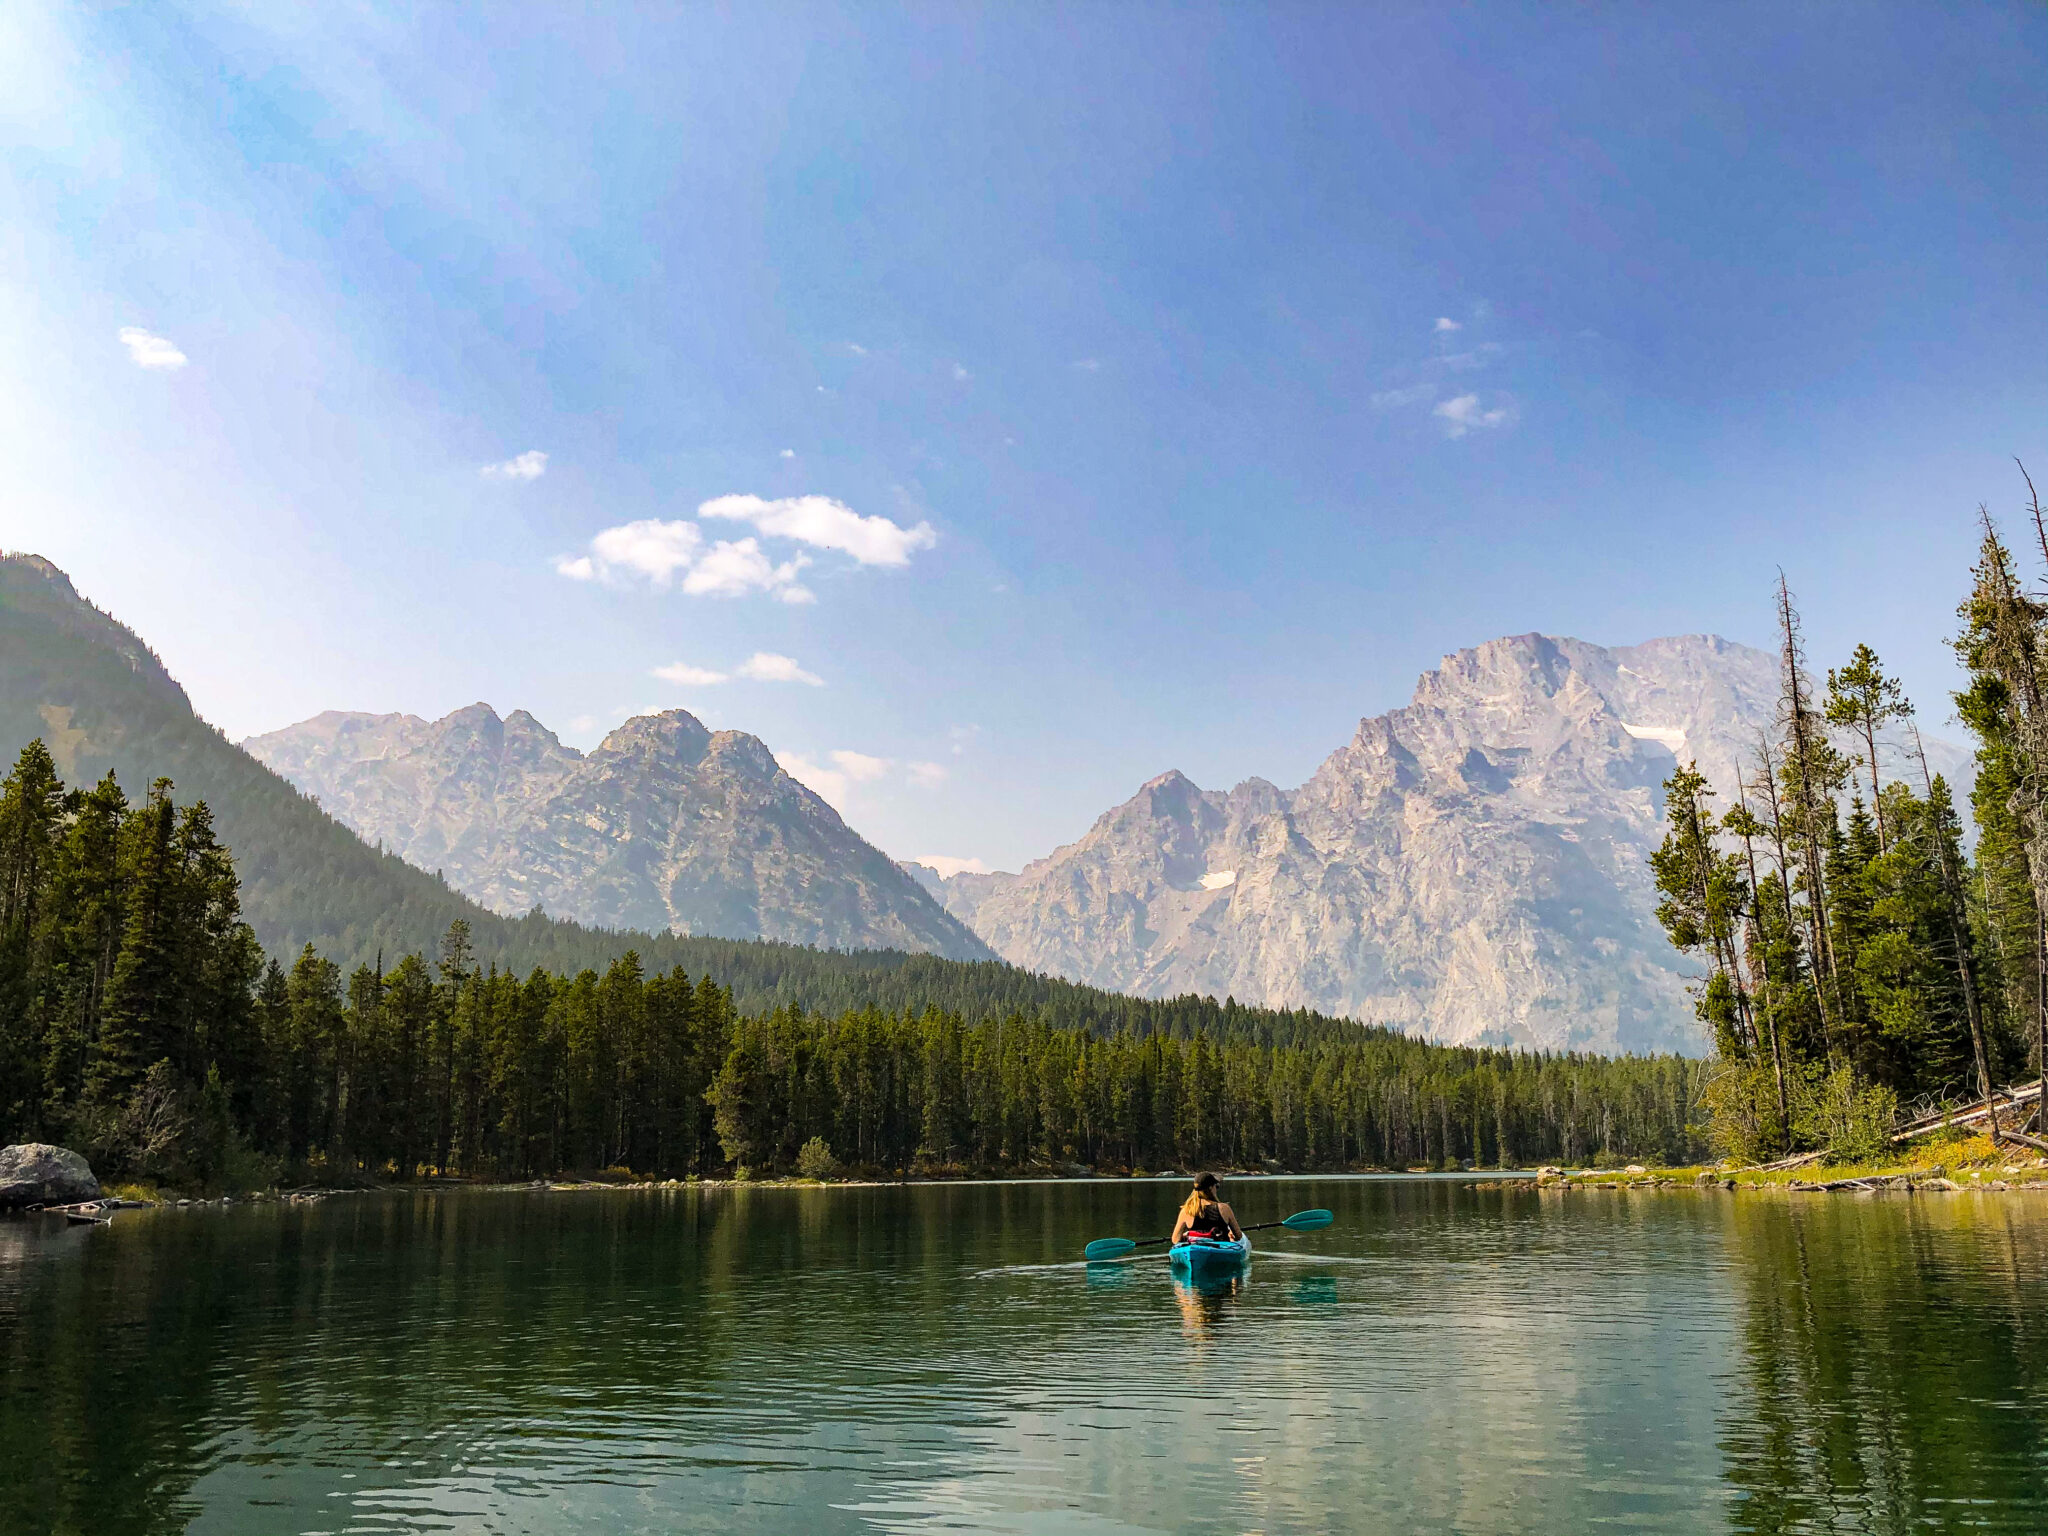 A kayaker floats serenely on an alpine lake with mountains rising in the distance.